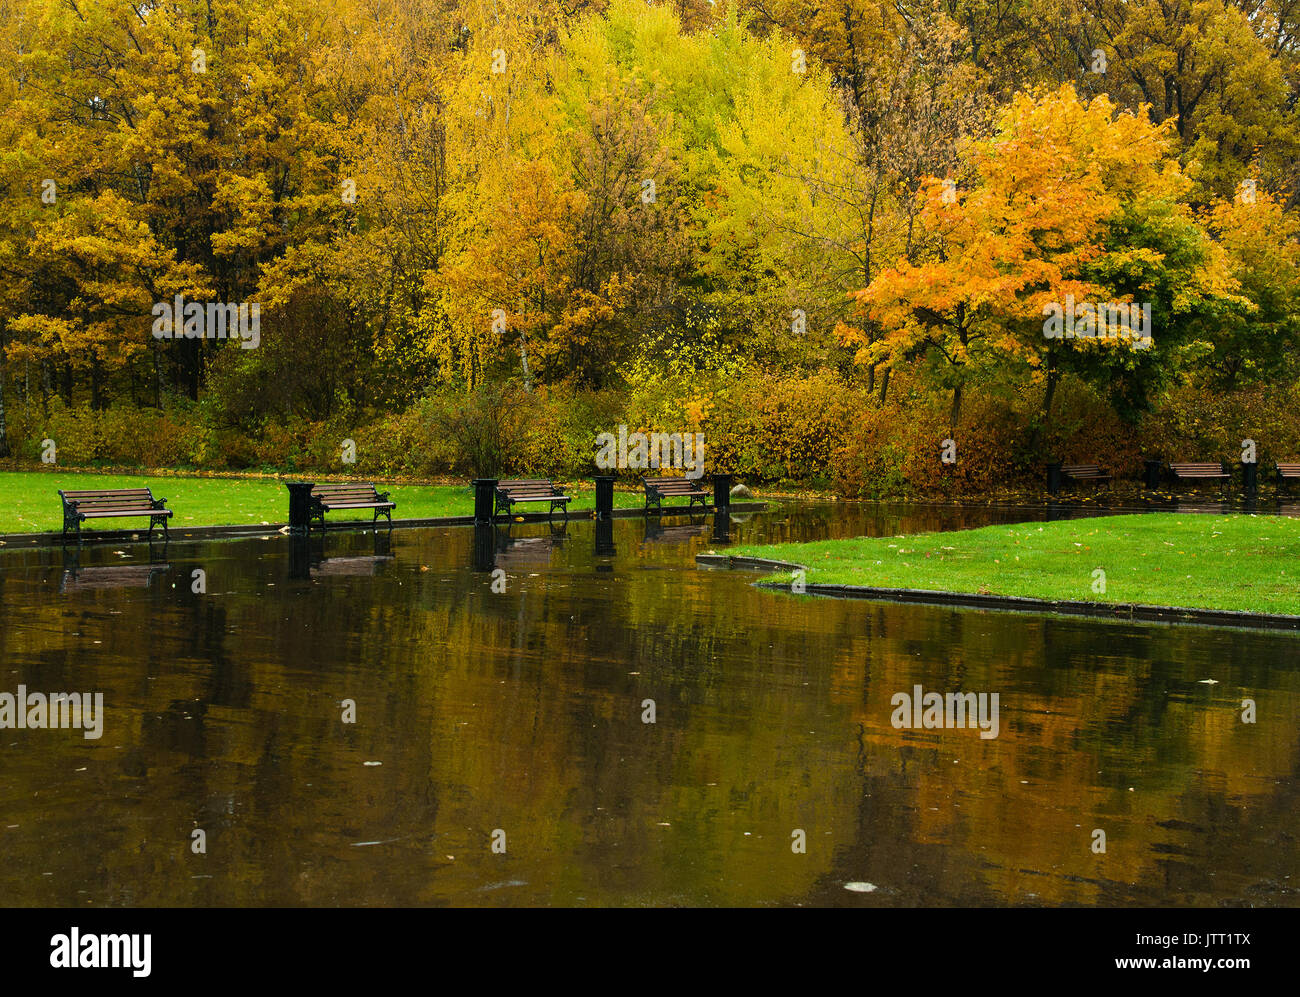 A park by rainy late autumn with yellow trees and their reflection in wet sidewalks. Stock Photo